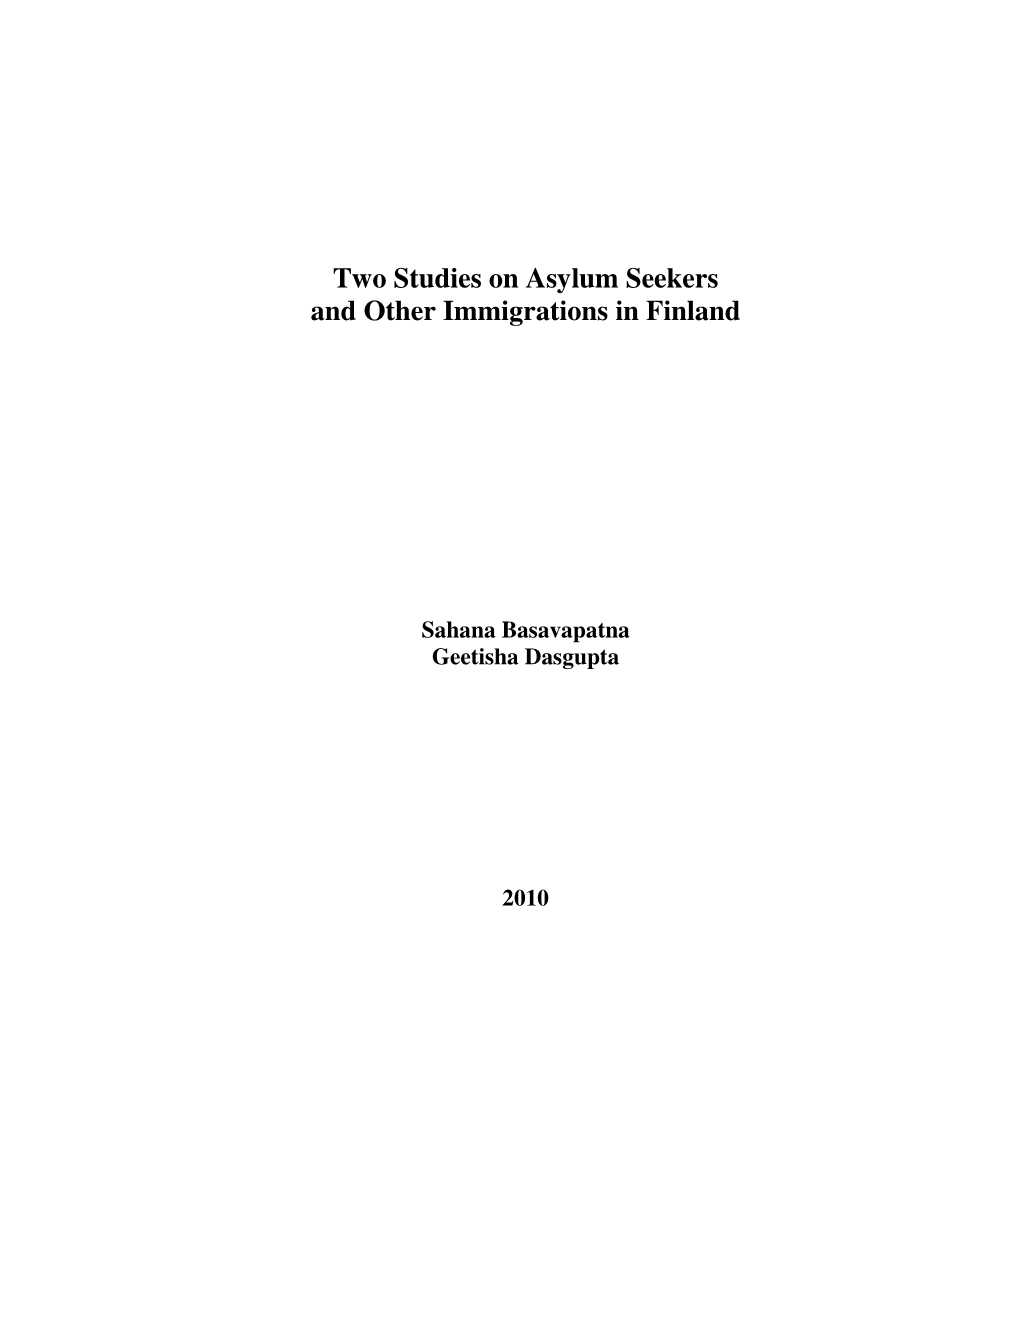 Two Studies on Asylum Seekers and Other Immigrations in Finland